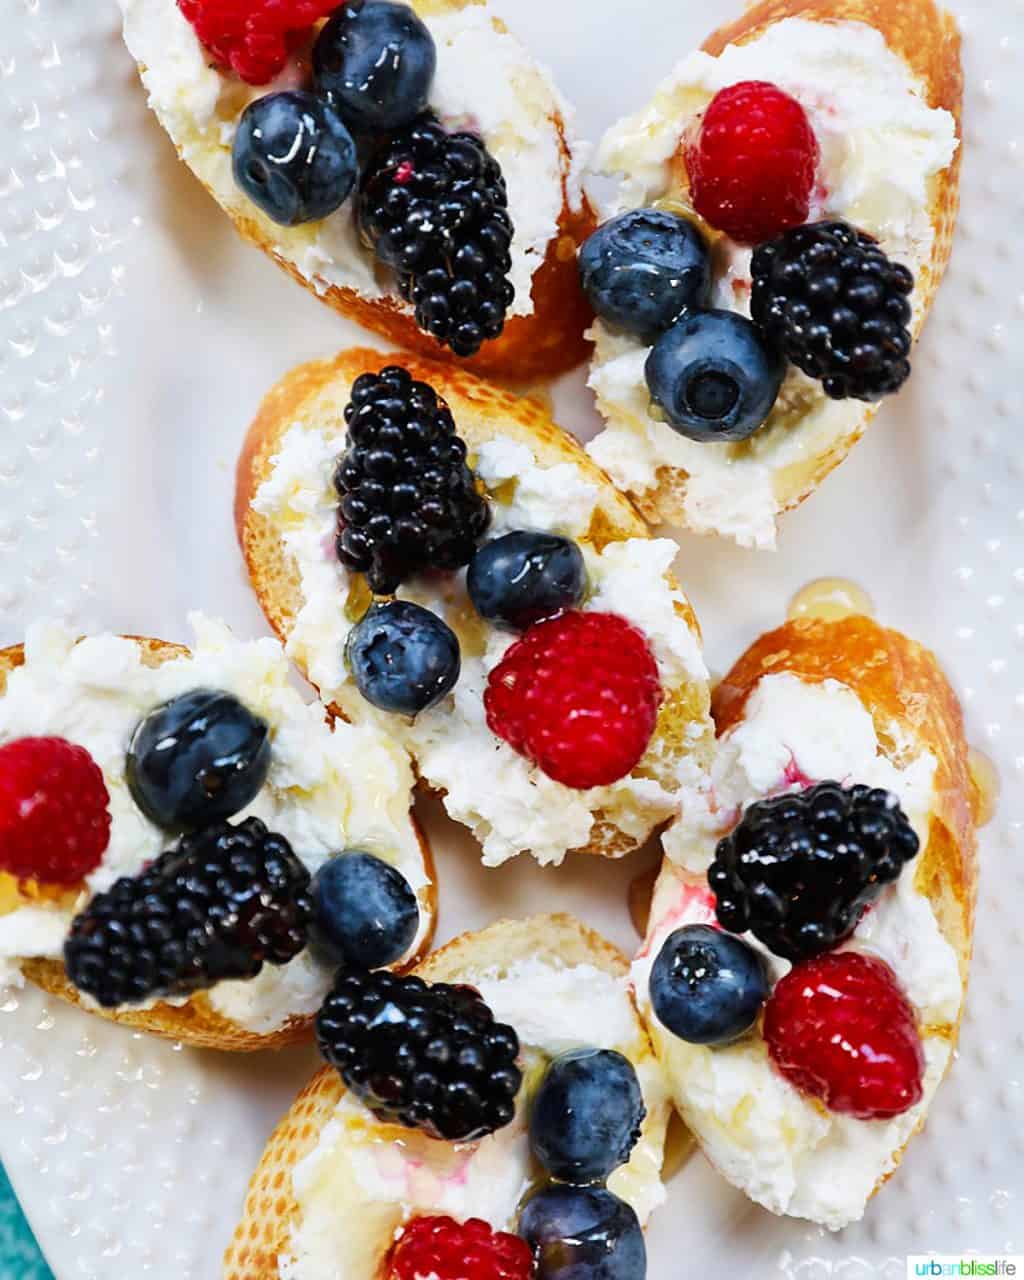 feature pic of ricotta crostini with summer berries ricotta crostini with summer berries